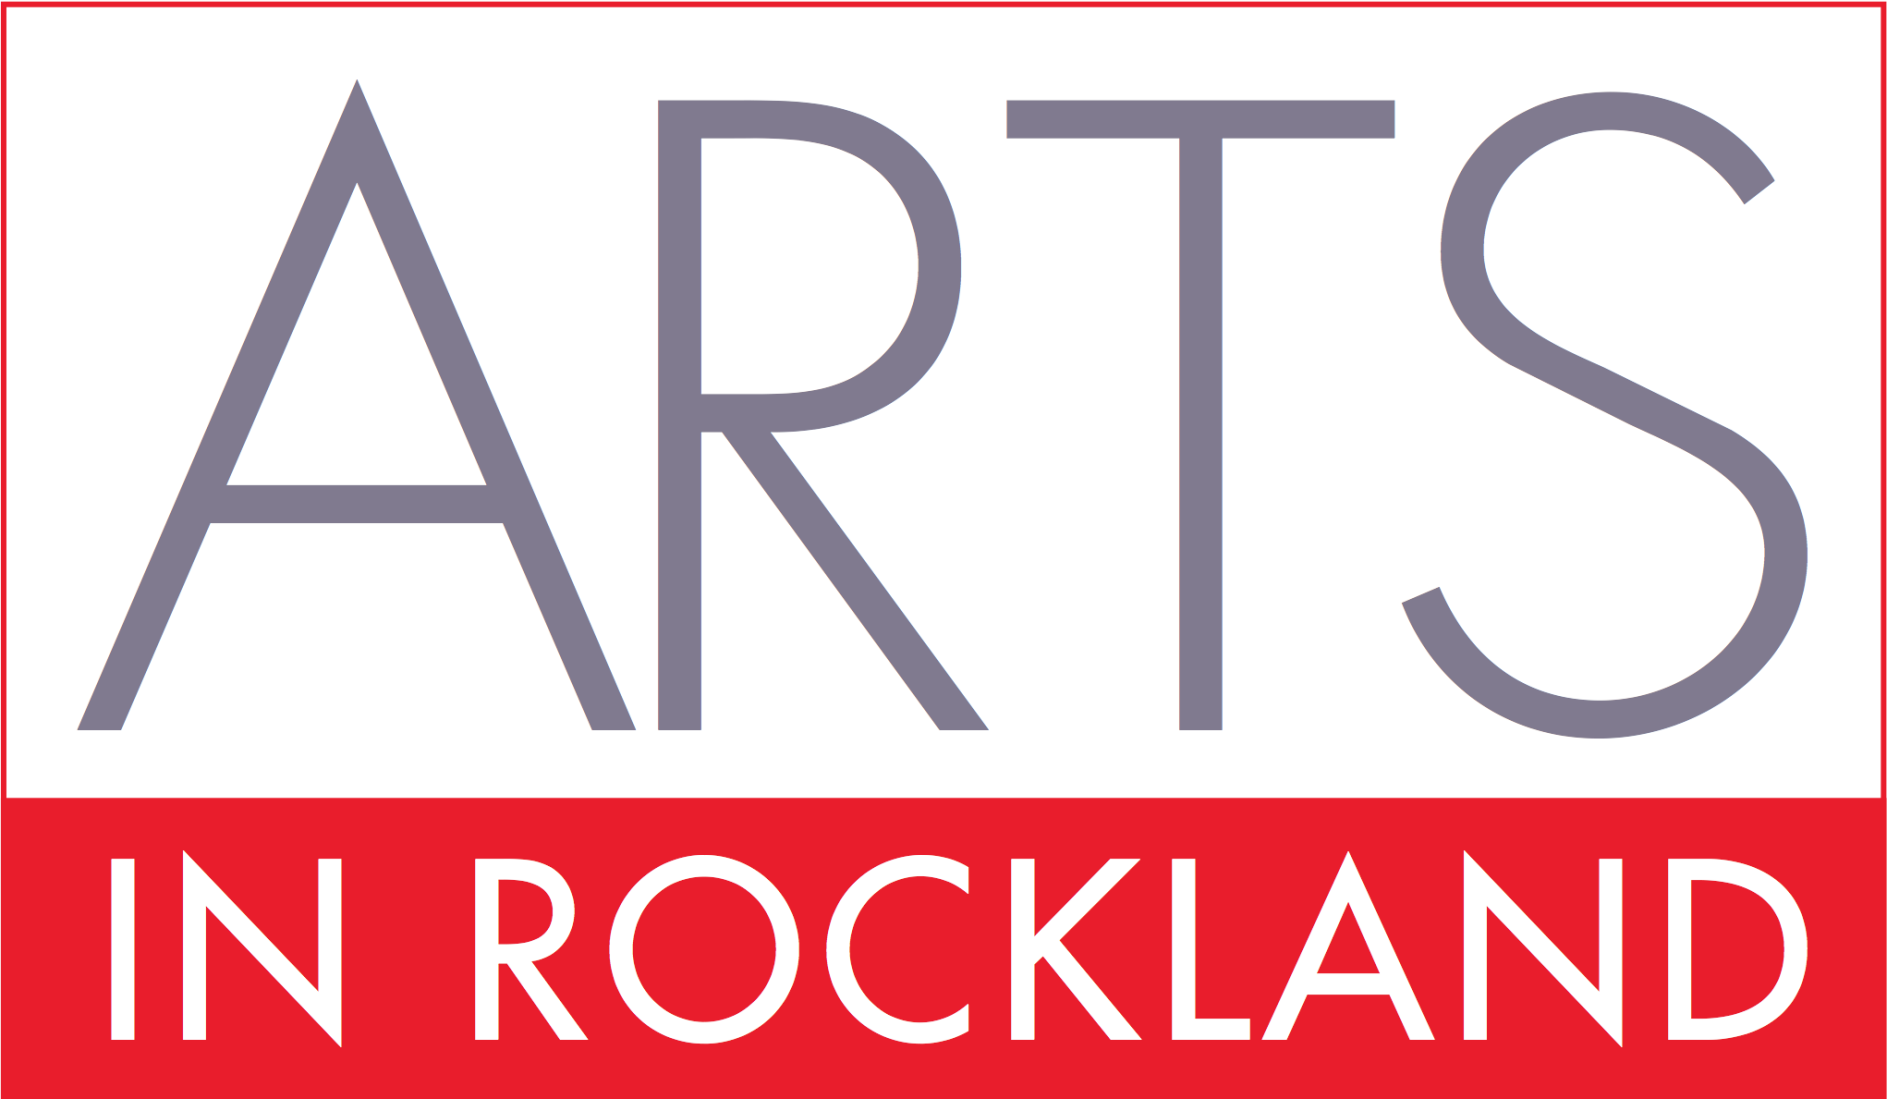 First Friday Art Walk in Rockland Arts & Living